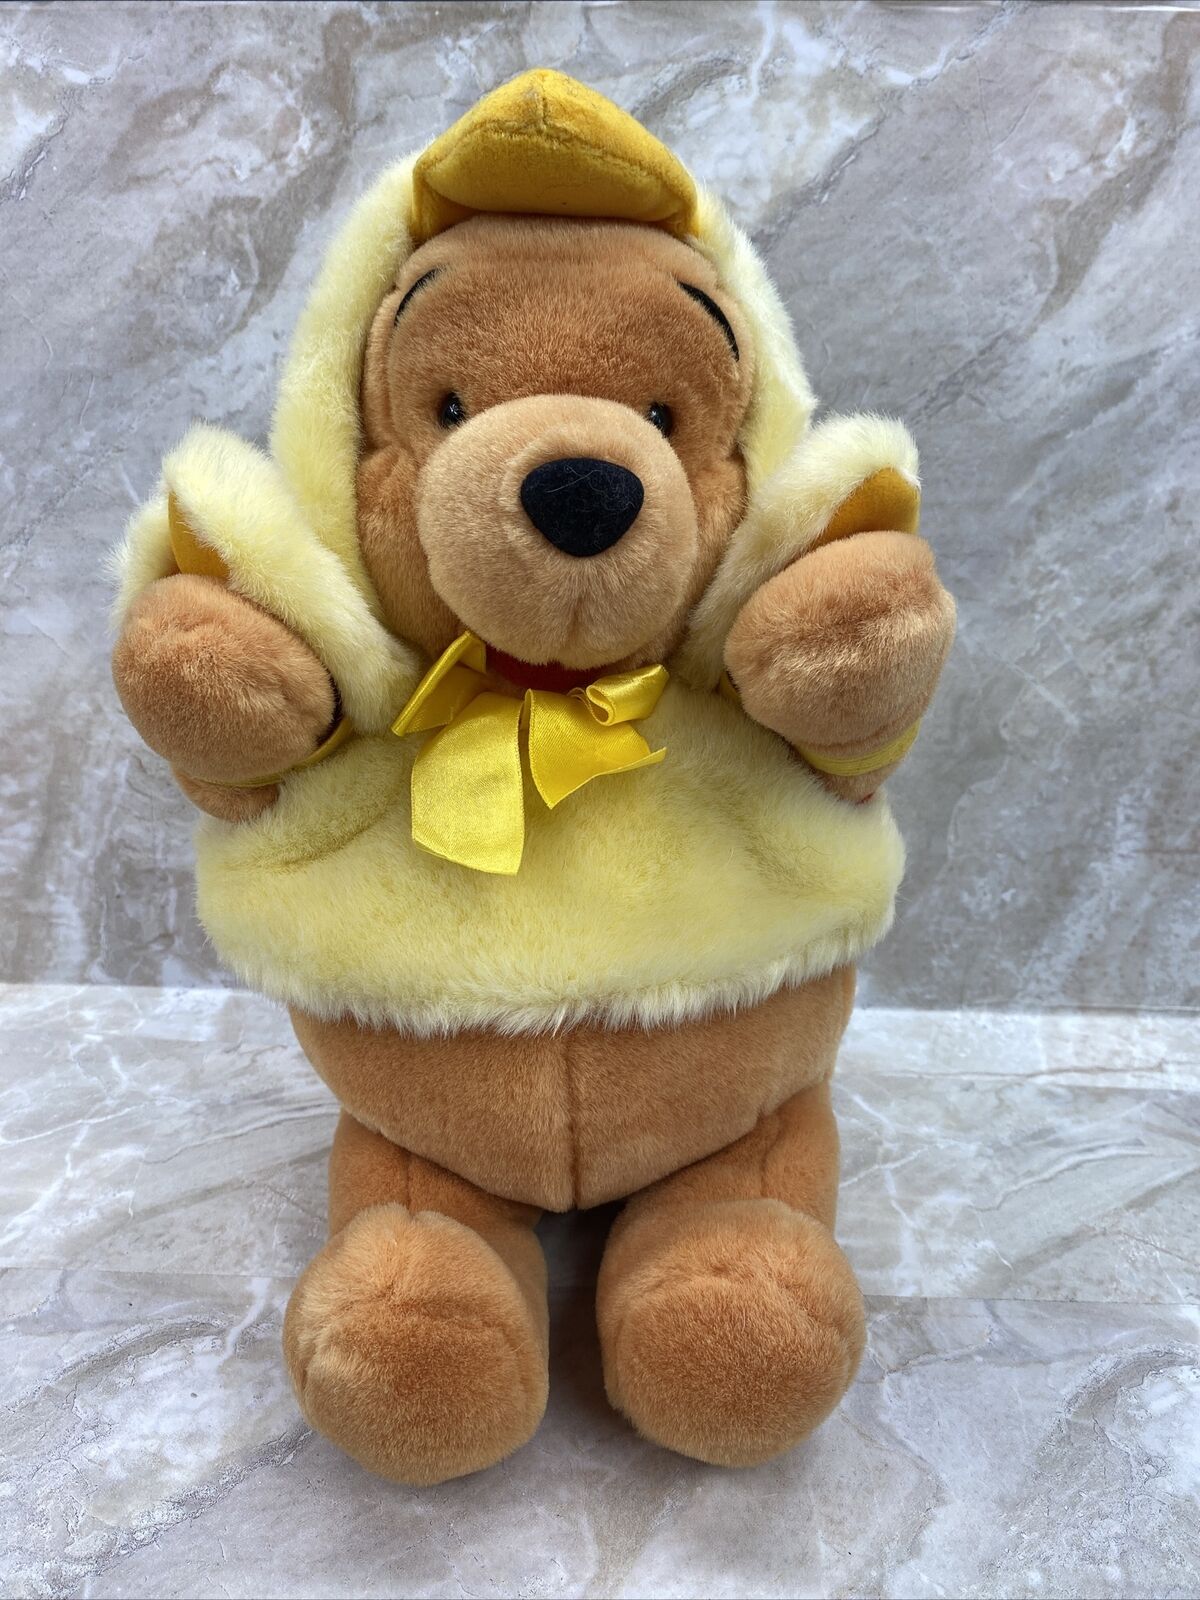 Disney Store Exclusive Easter Chick Winnie The Pooh 13" Plush Stuffed Animal Toy